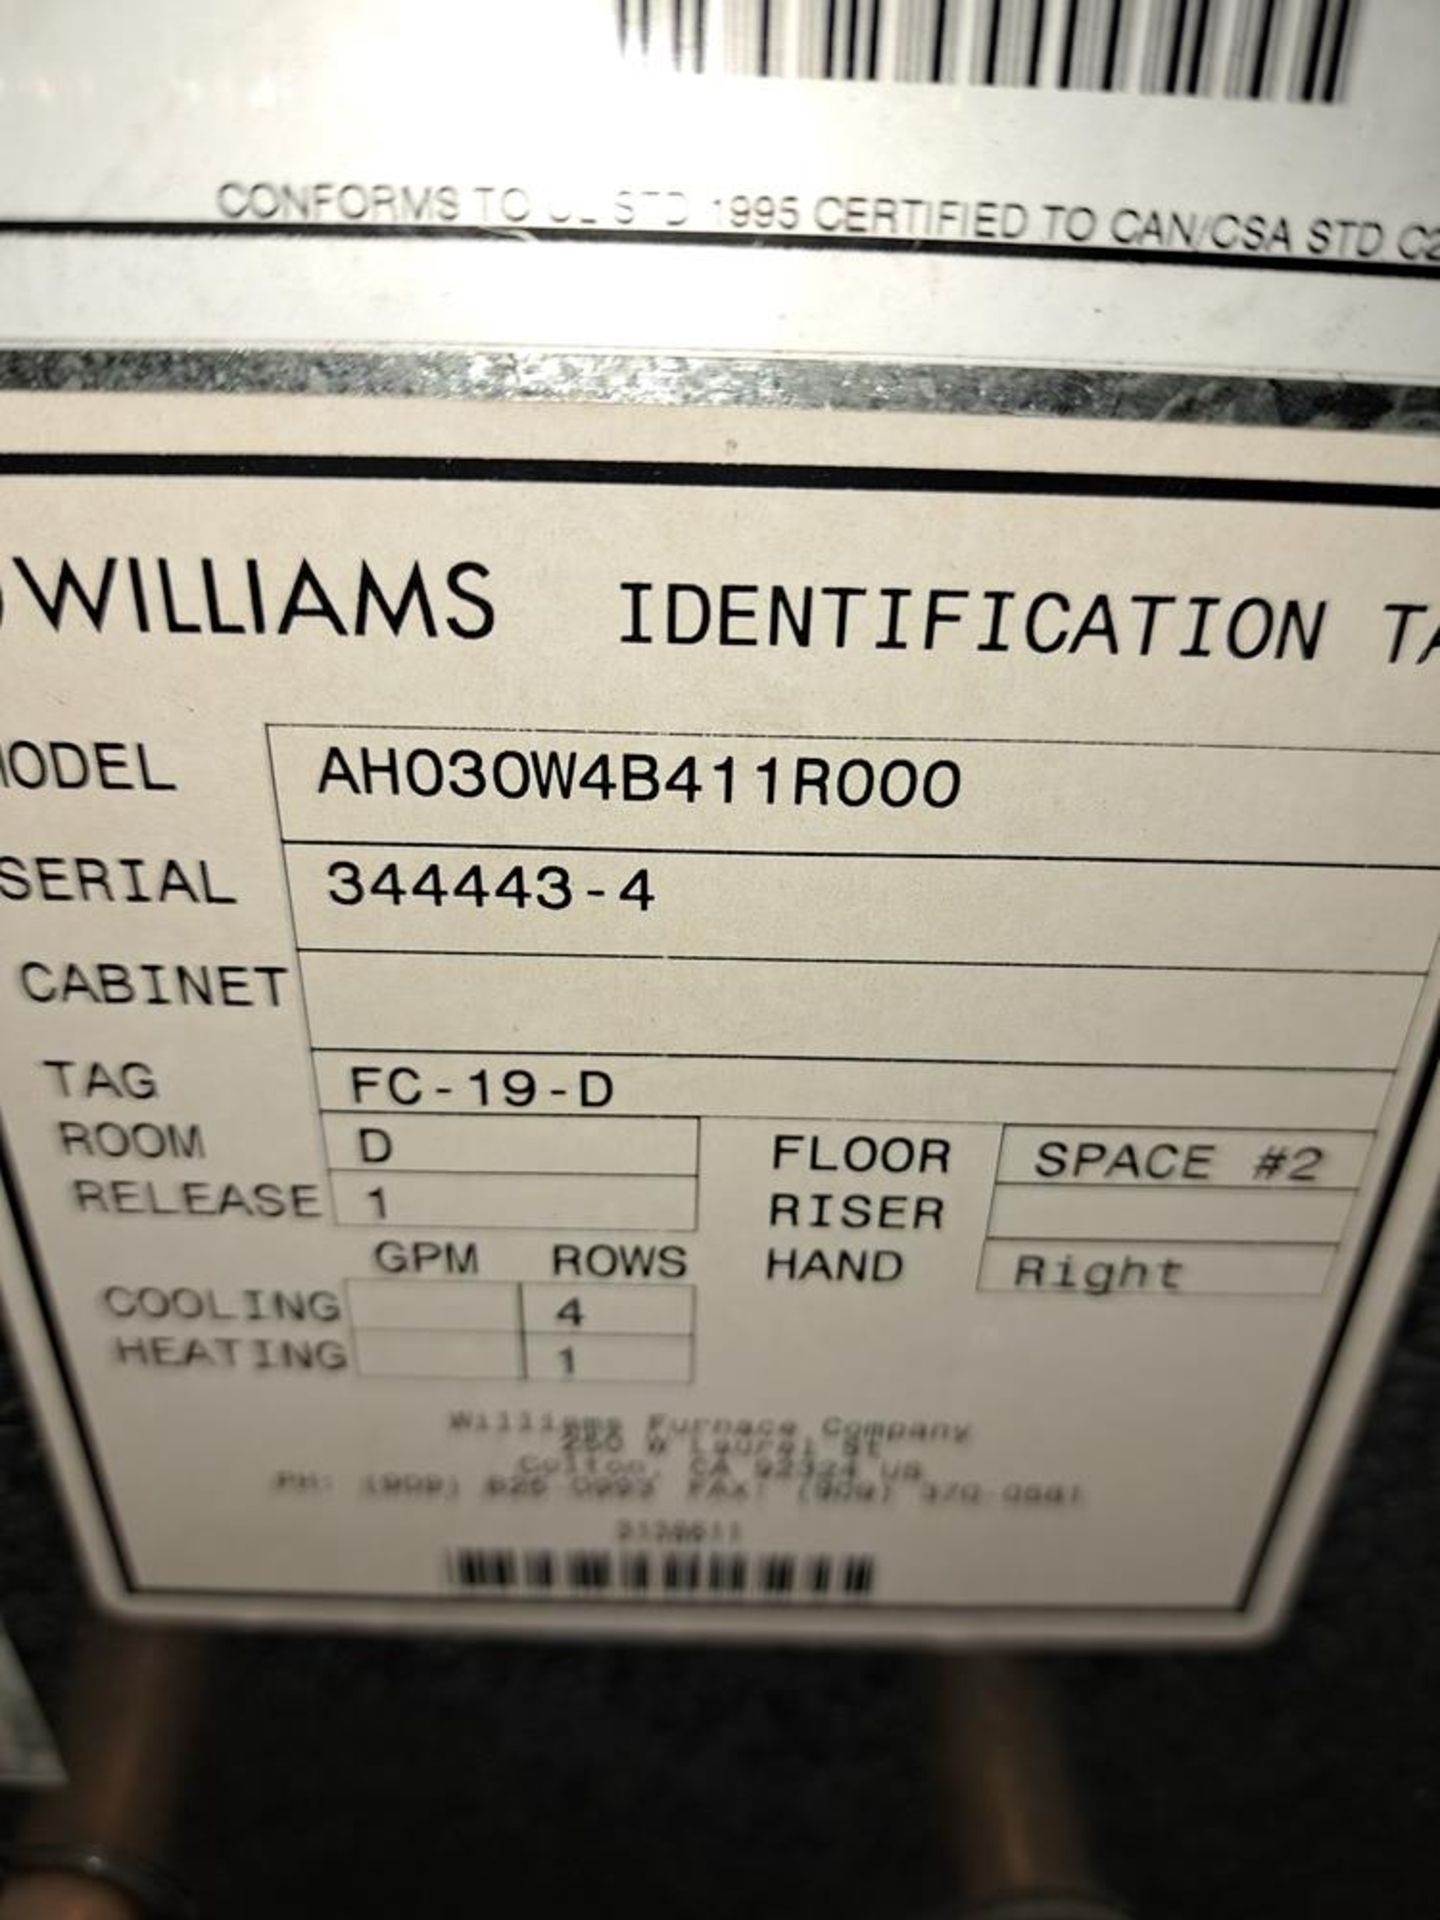 Williams Mdl. #AH030WB11R000 Fan Coil, Ser. #344443-4, 120 volts (New/Unused In Crate)spanphoto - Image 4 of 5